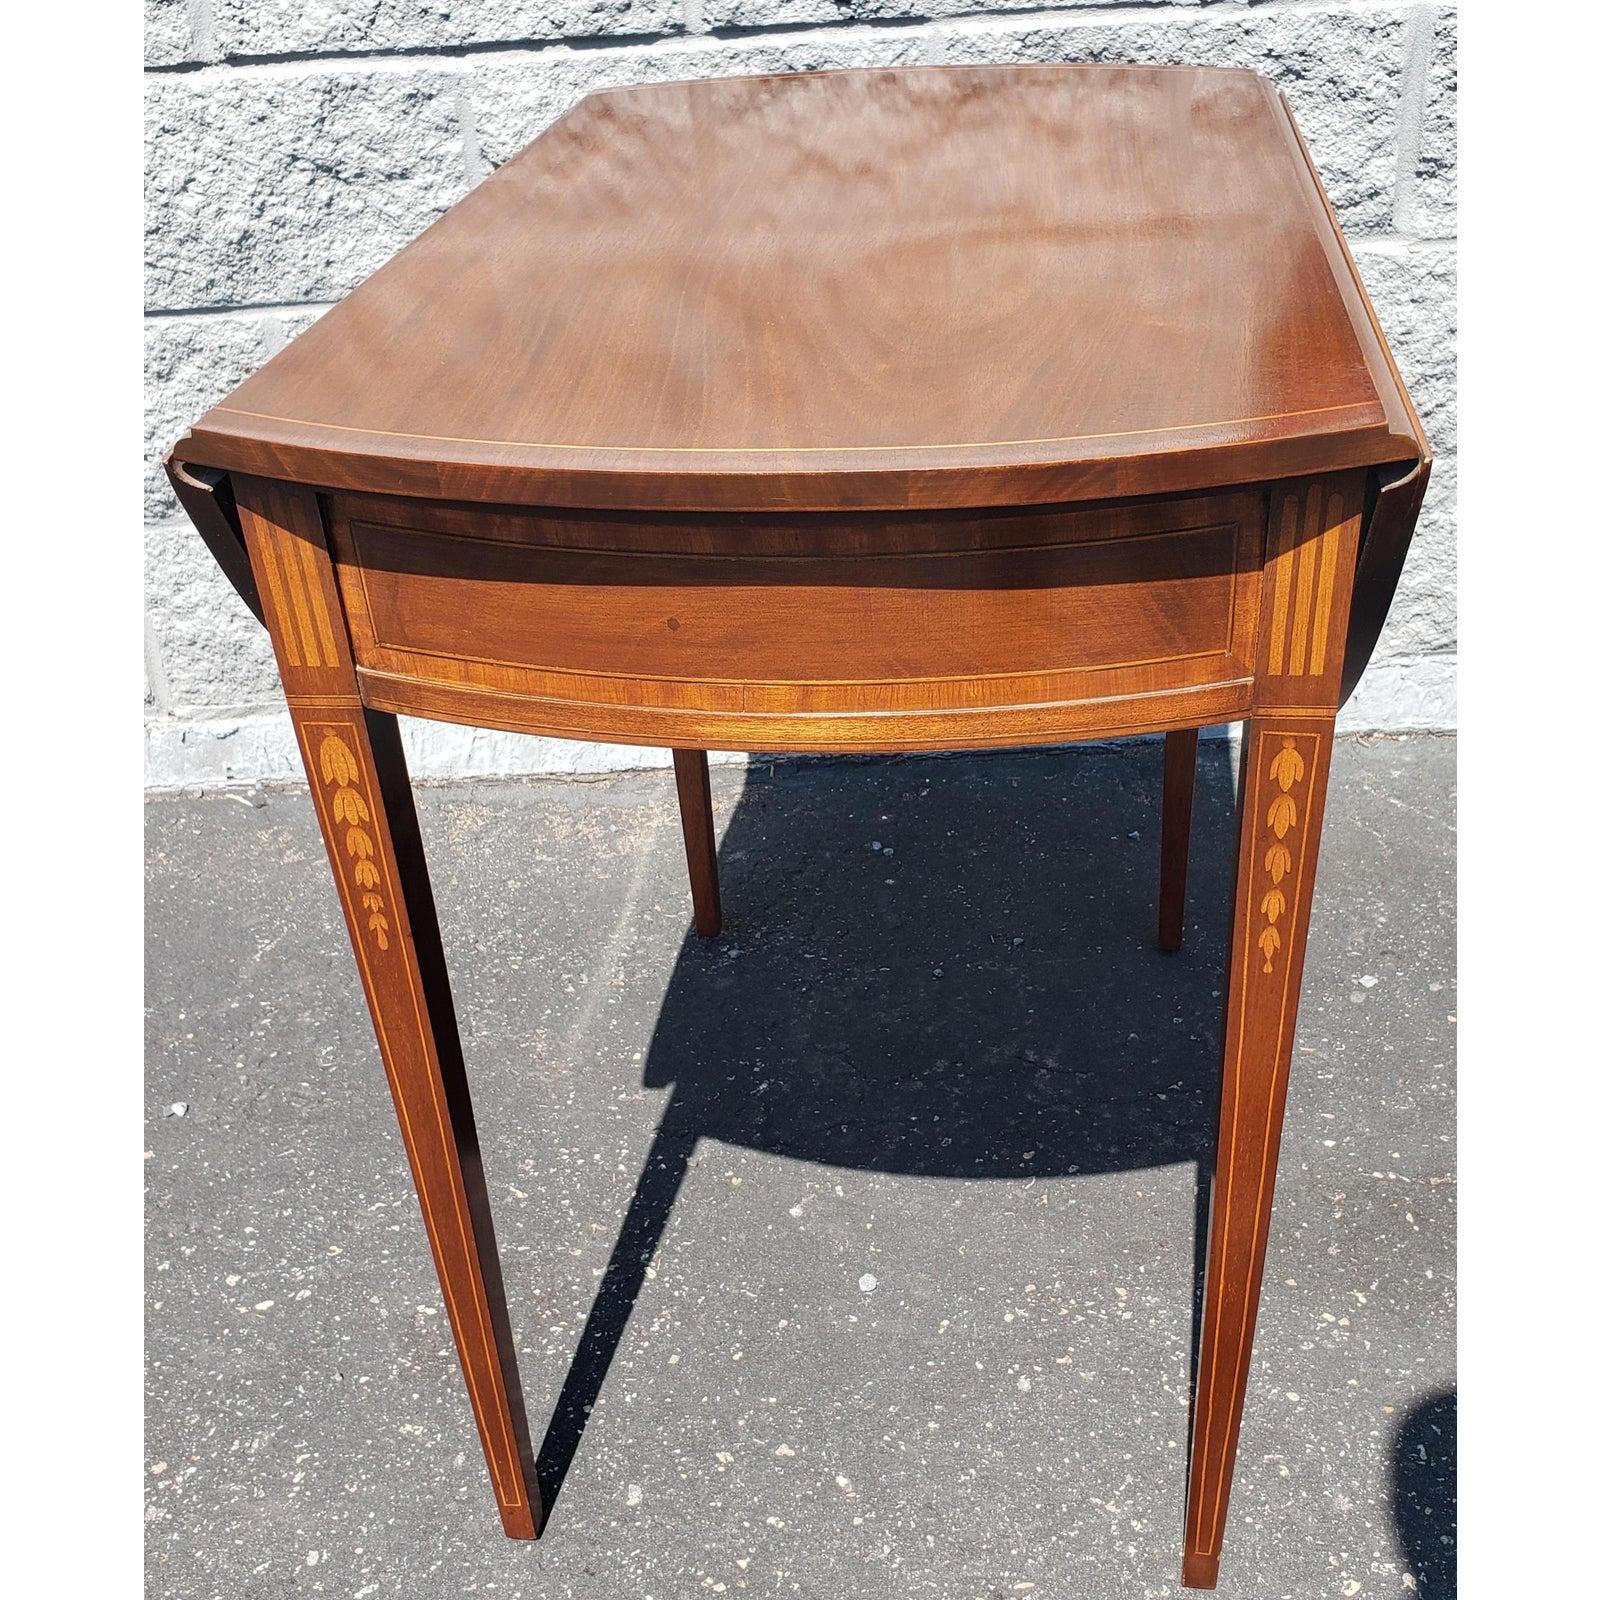 American 1970s Chippendale Inlaid Mahogany and Satin Wood Drop Leaf Pembroke Table